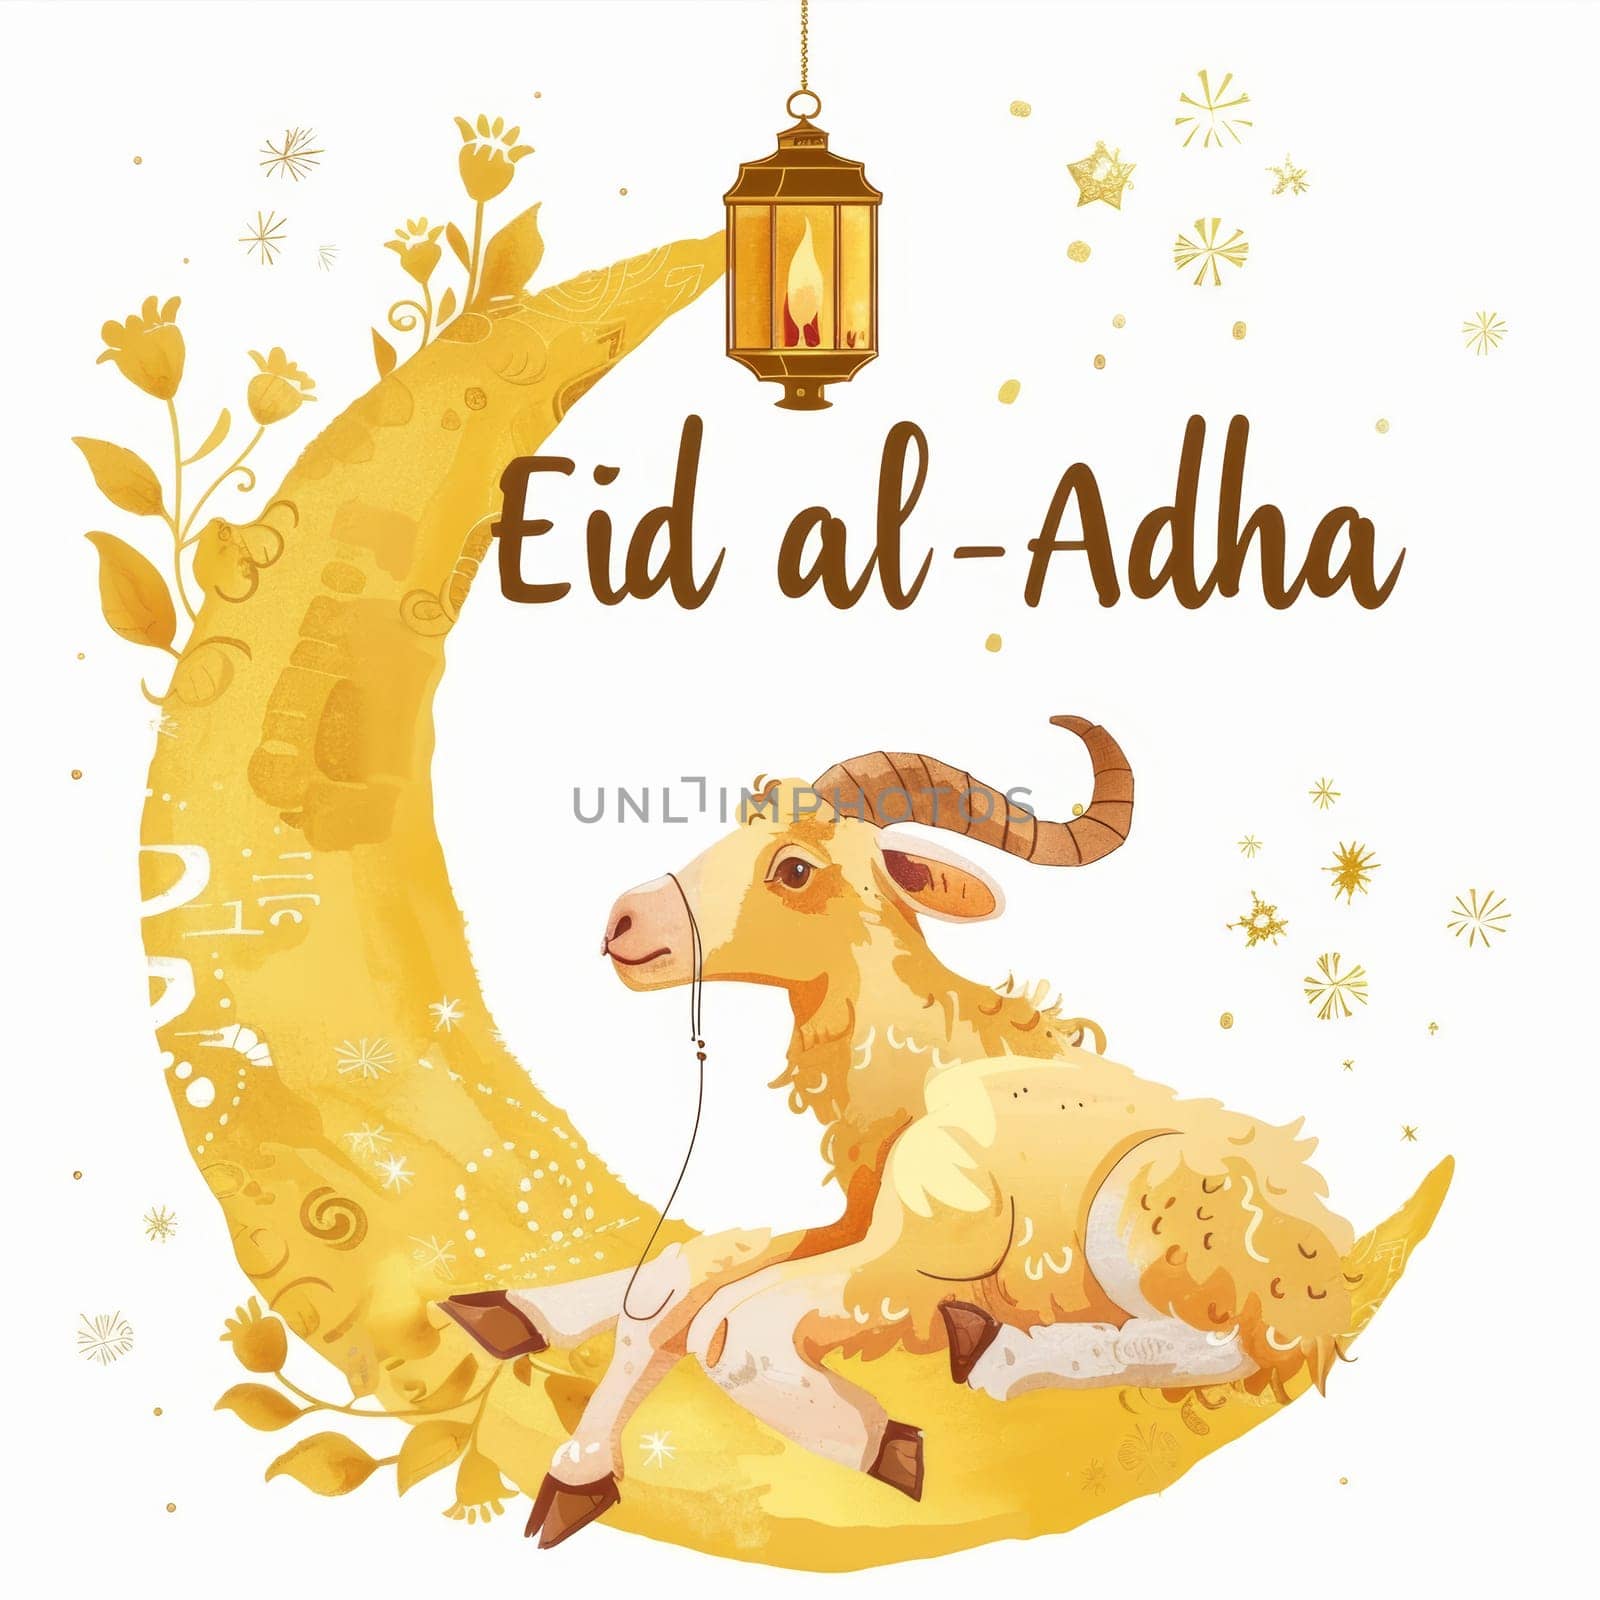 A whimsical and cheerful depiction of a sheep beneath a golden moon for Eid al-Adha, evoking a sense of joy and festivity